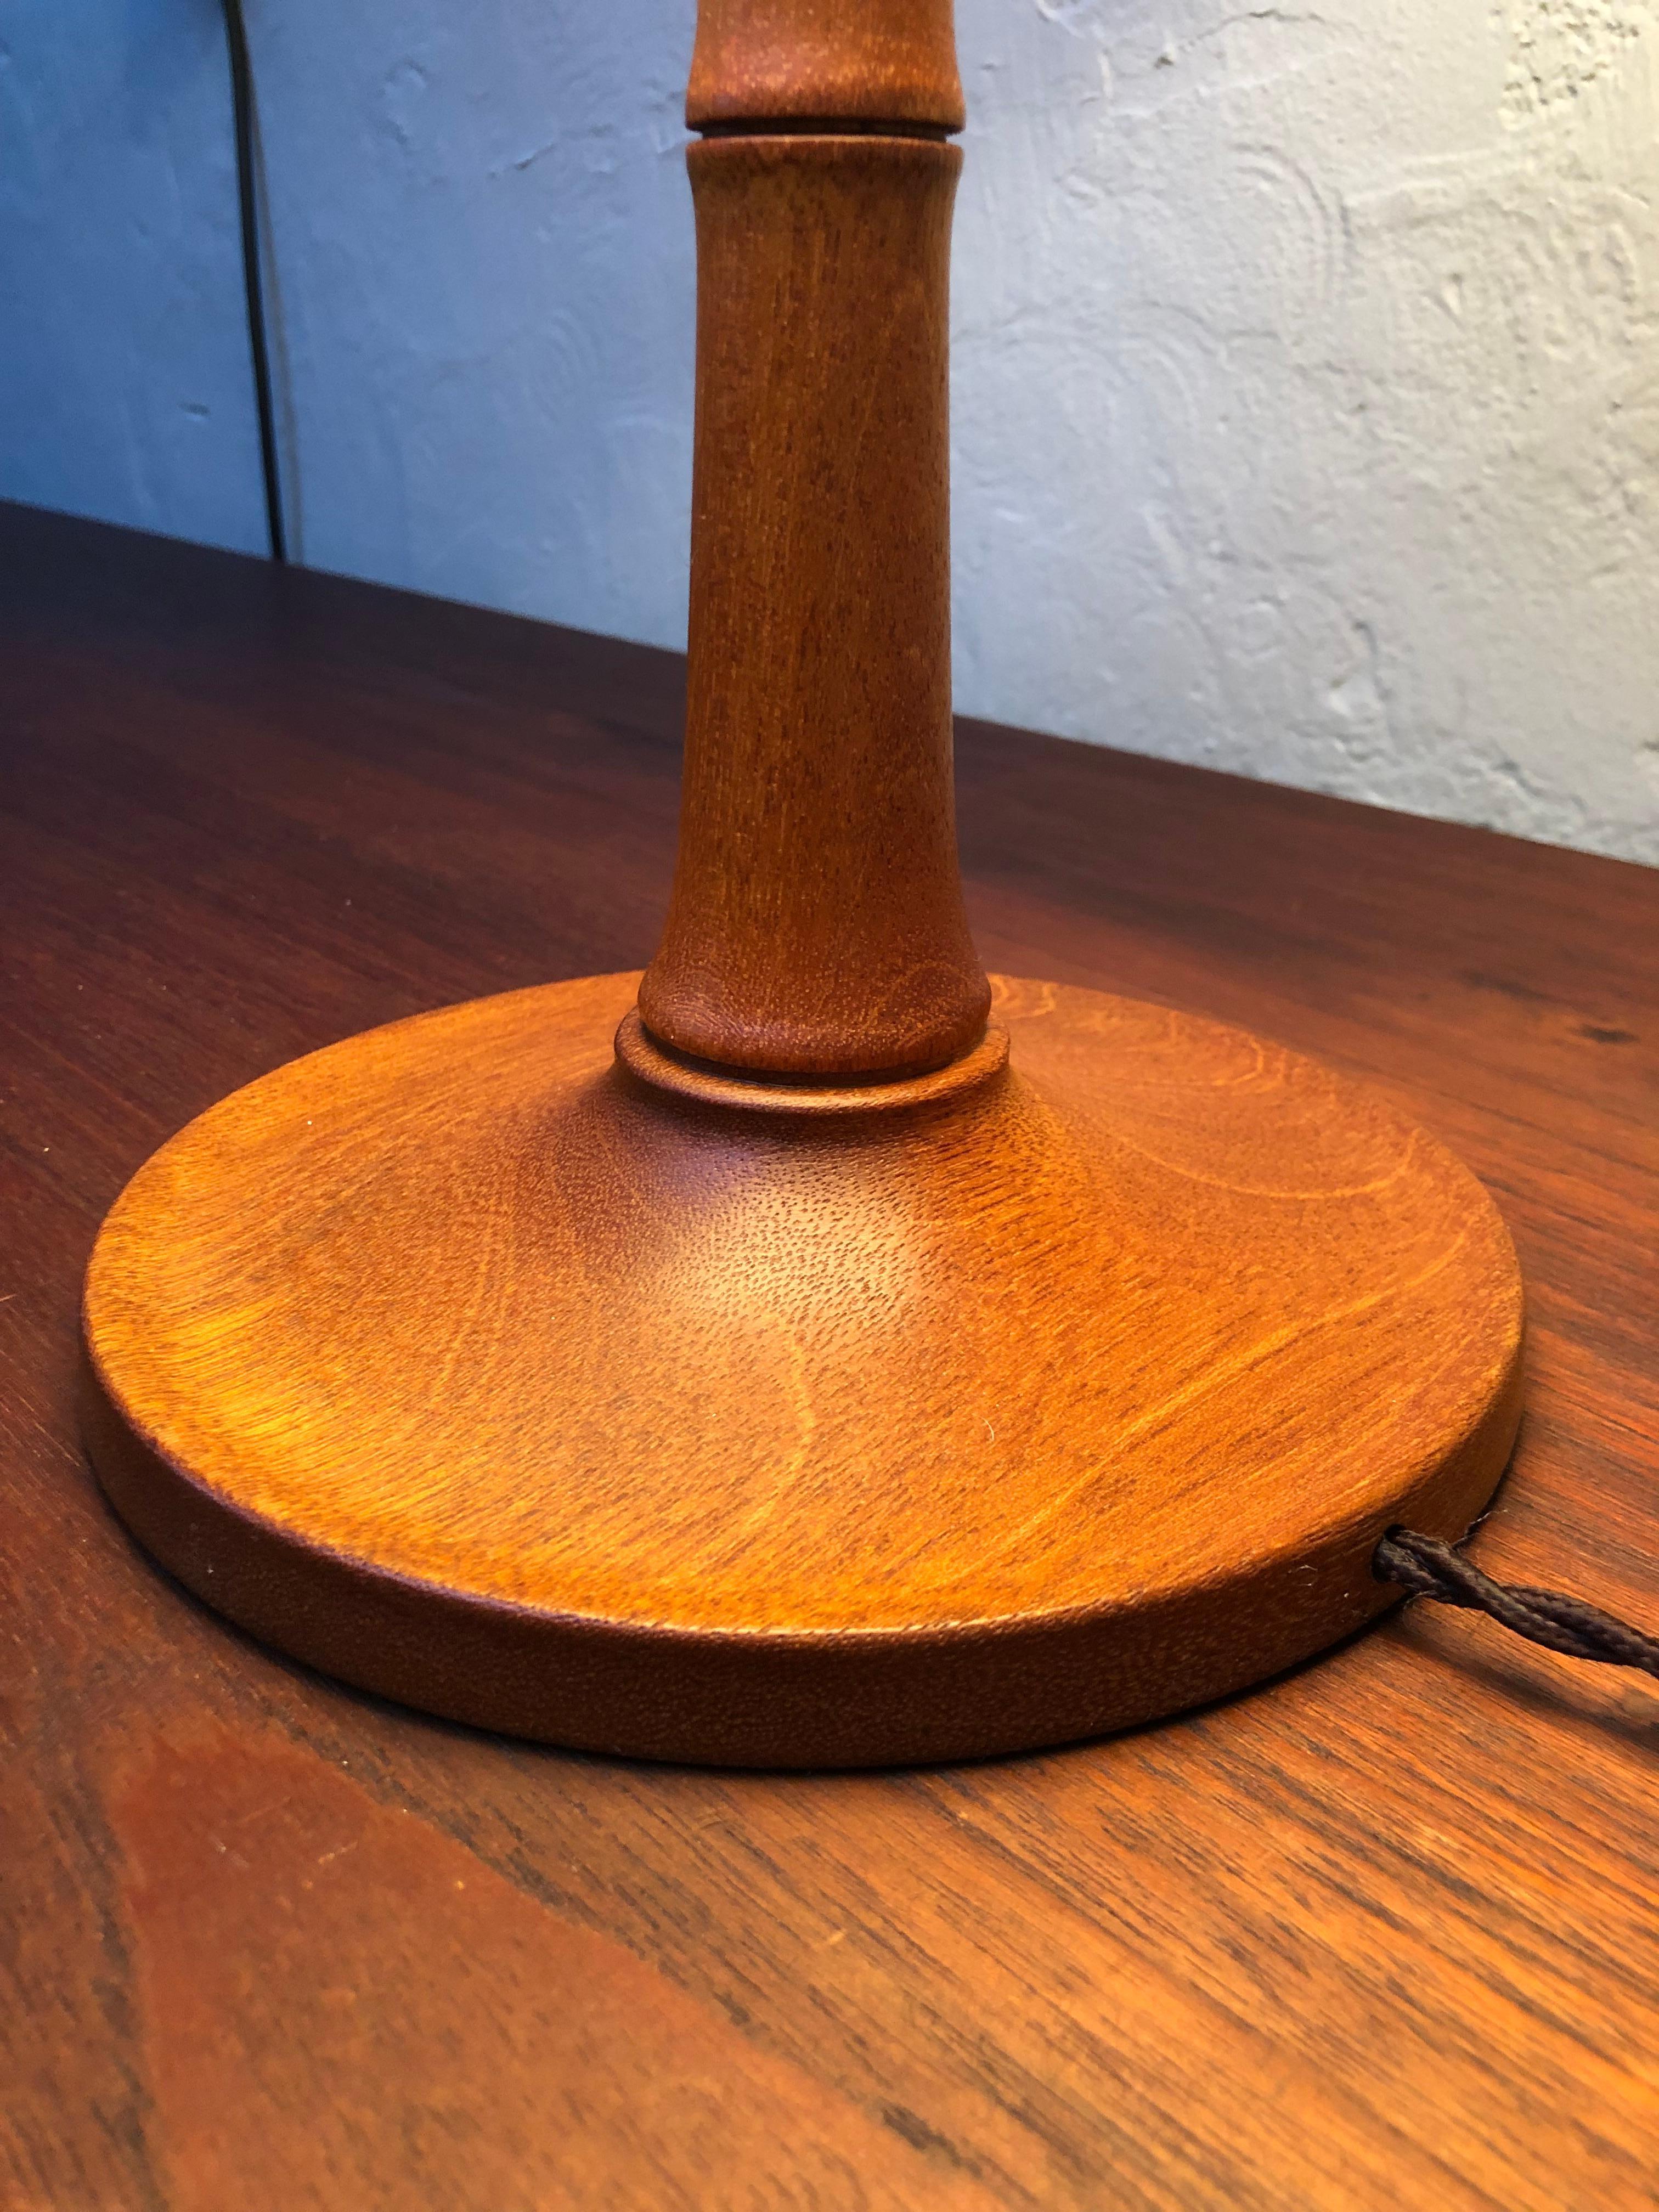 A Vintage Teak Table Lamp by Esben Klint for Le Klint from the 1940s In Good Condition For Sale In Søborg, DK